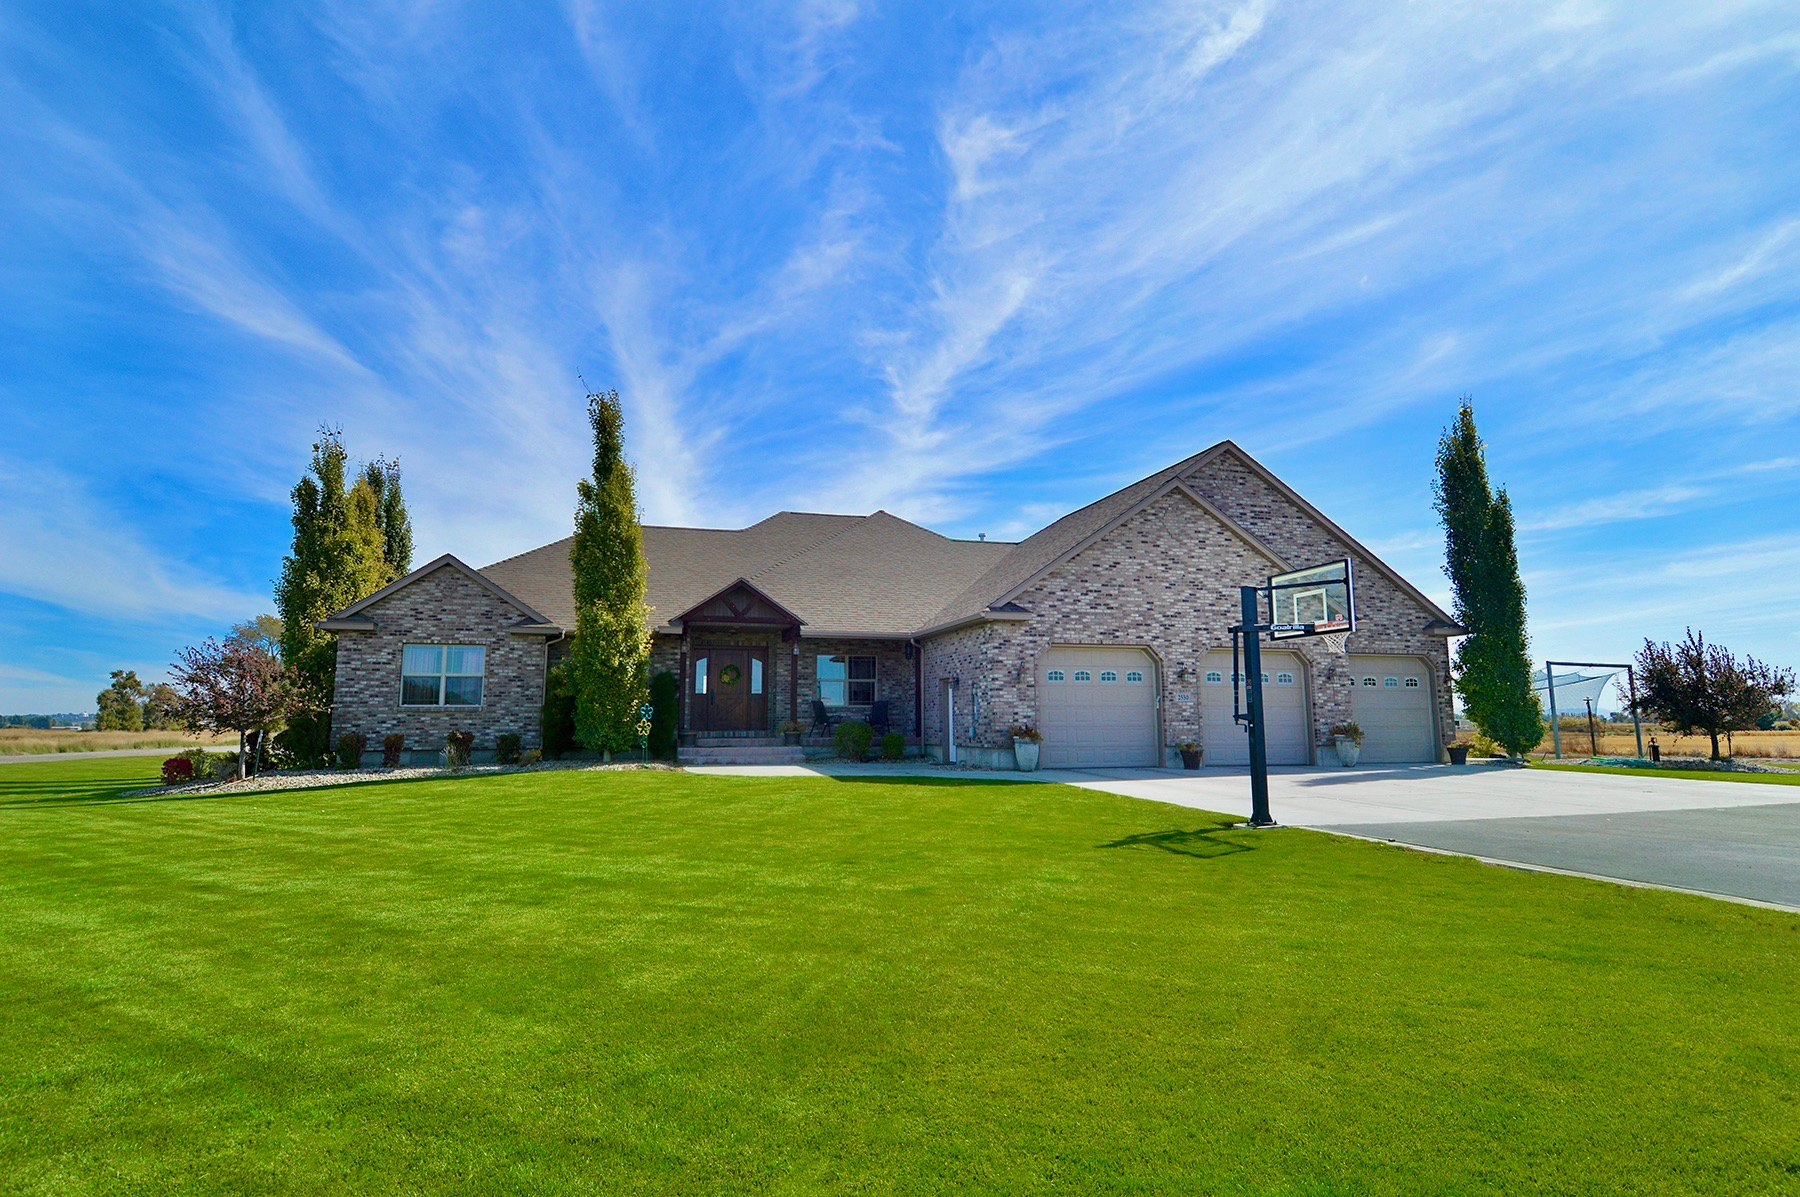 Lawn care services in Idaho Falls